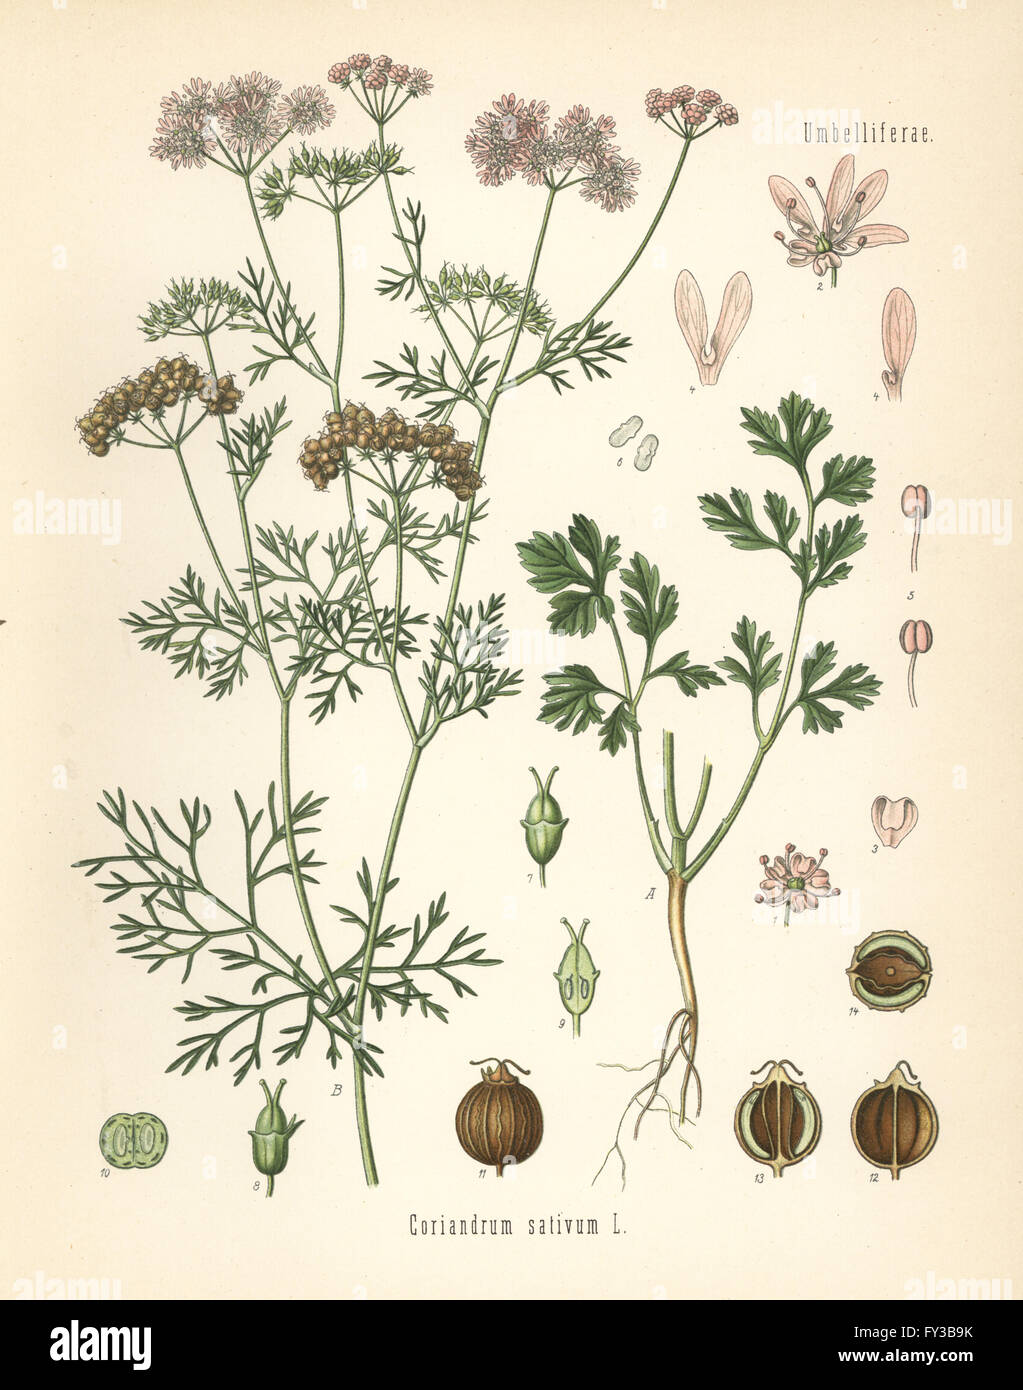 Coriander, Coriandrum sativum. Chromolithograph after a botanical illustration from Hermann Adolph Koehler's Medicinal Plants, edited by Gustav Pabst, Koehler, Germany, 1887. Stock Photo